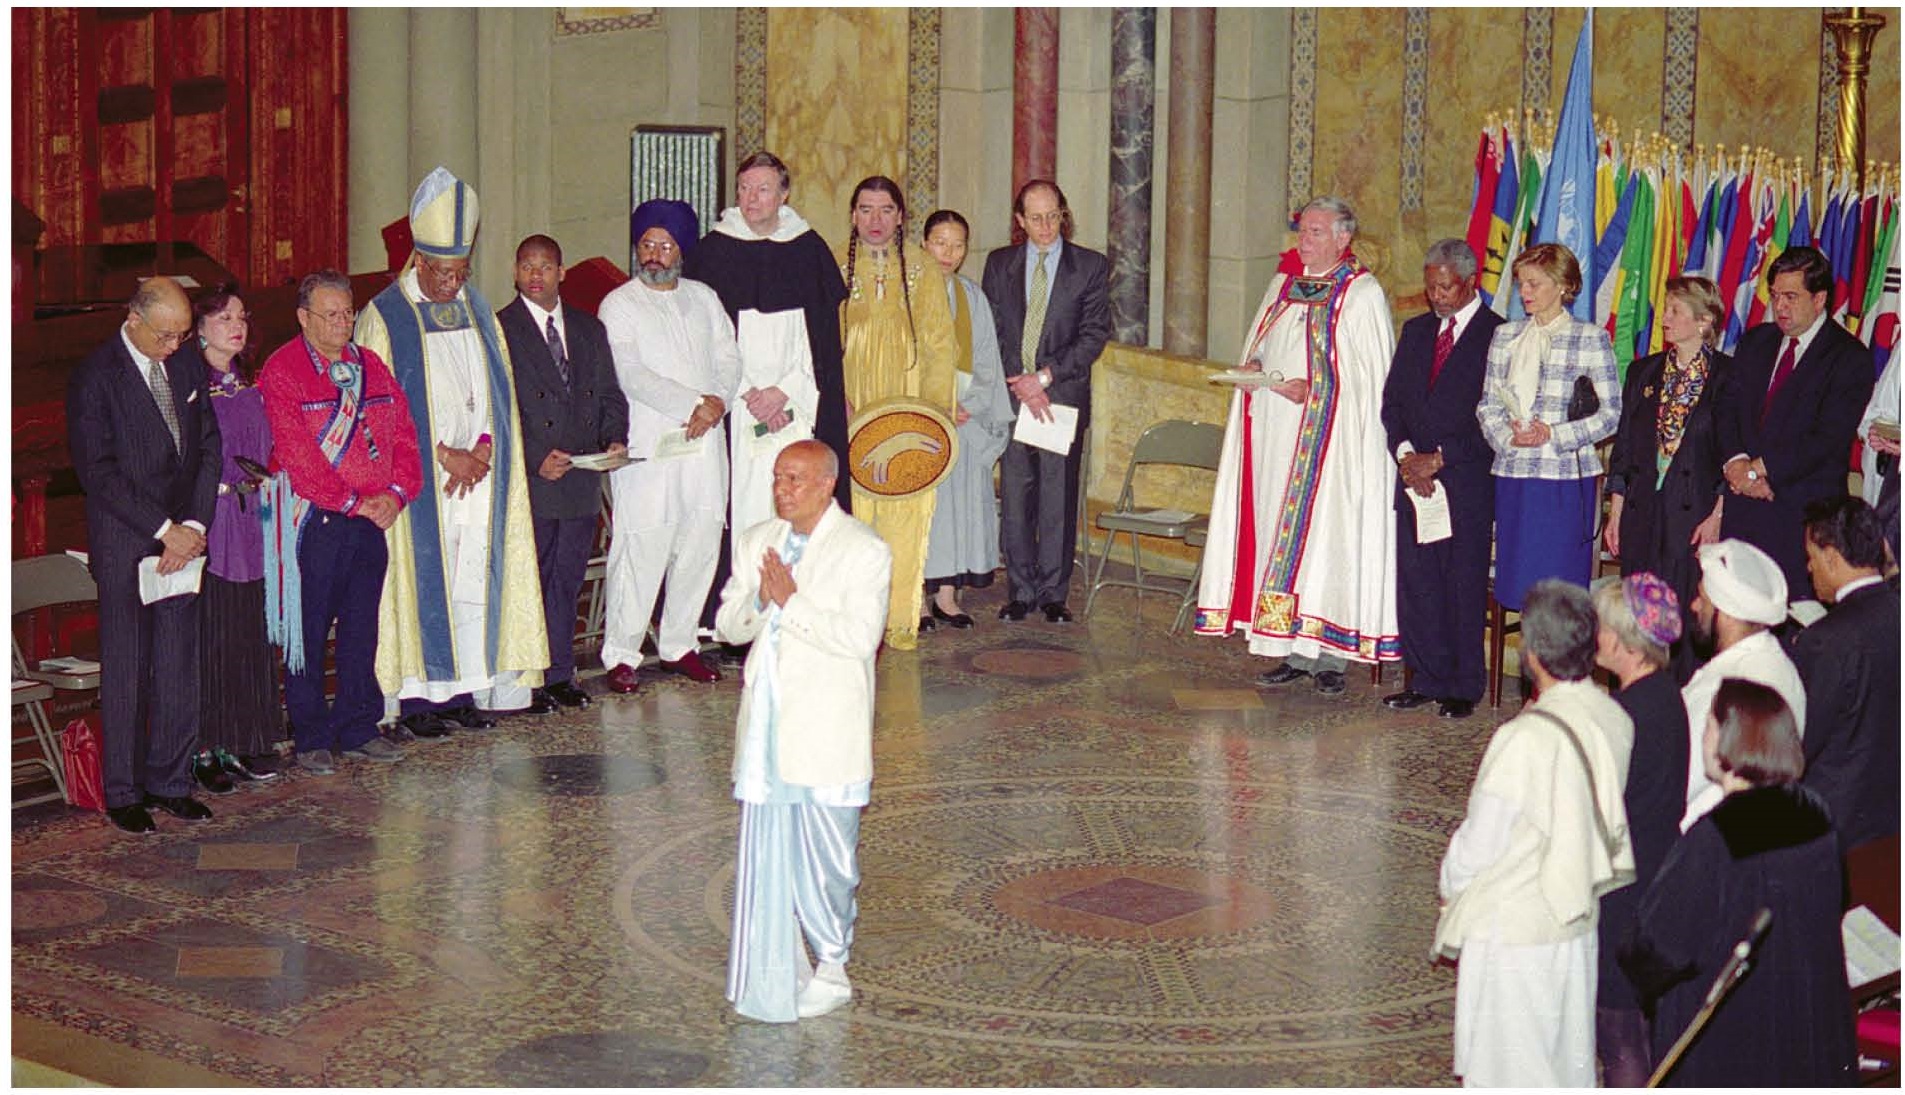 Interfaith Service of Commitment, 25 April 1997